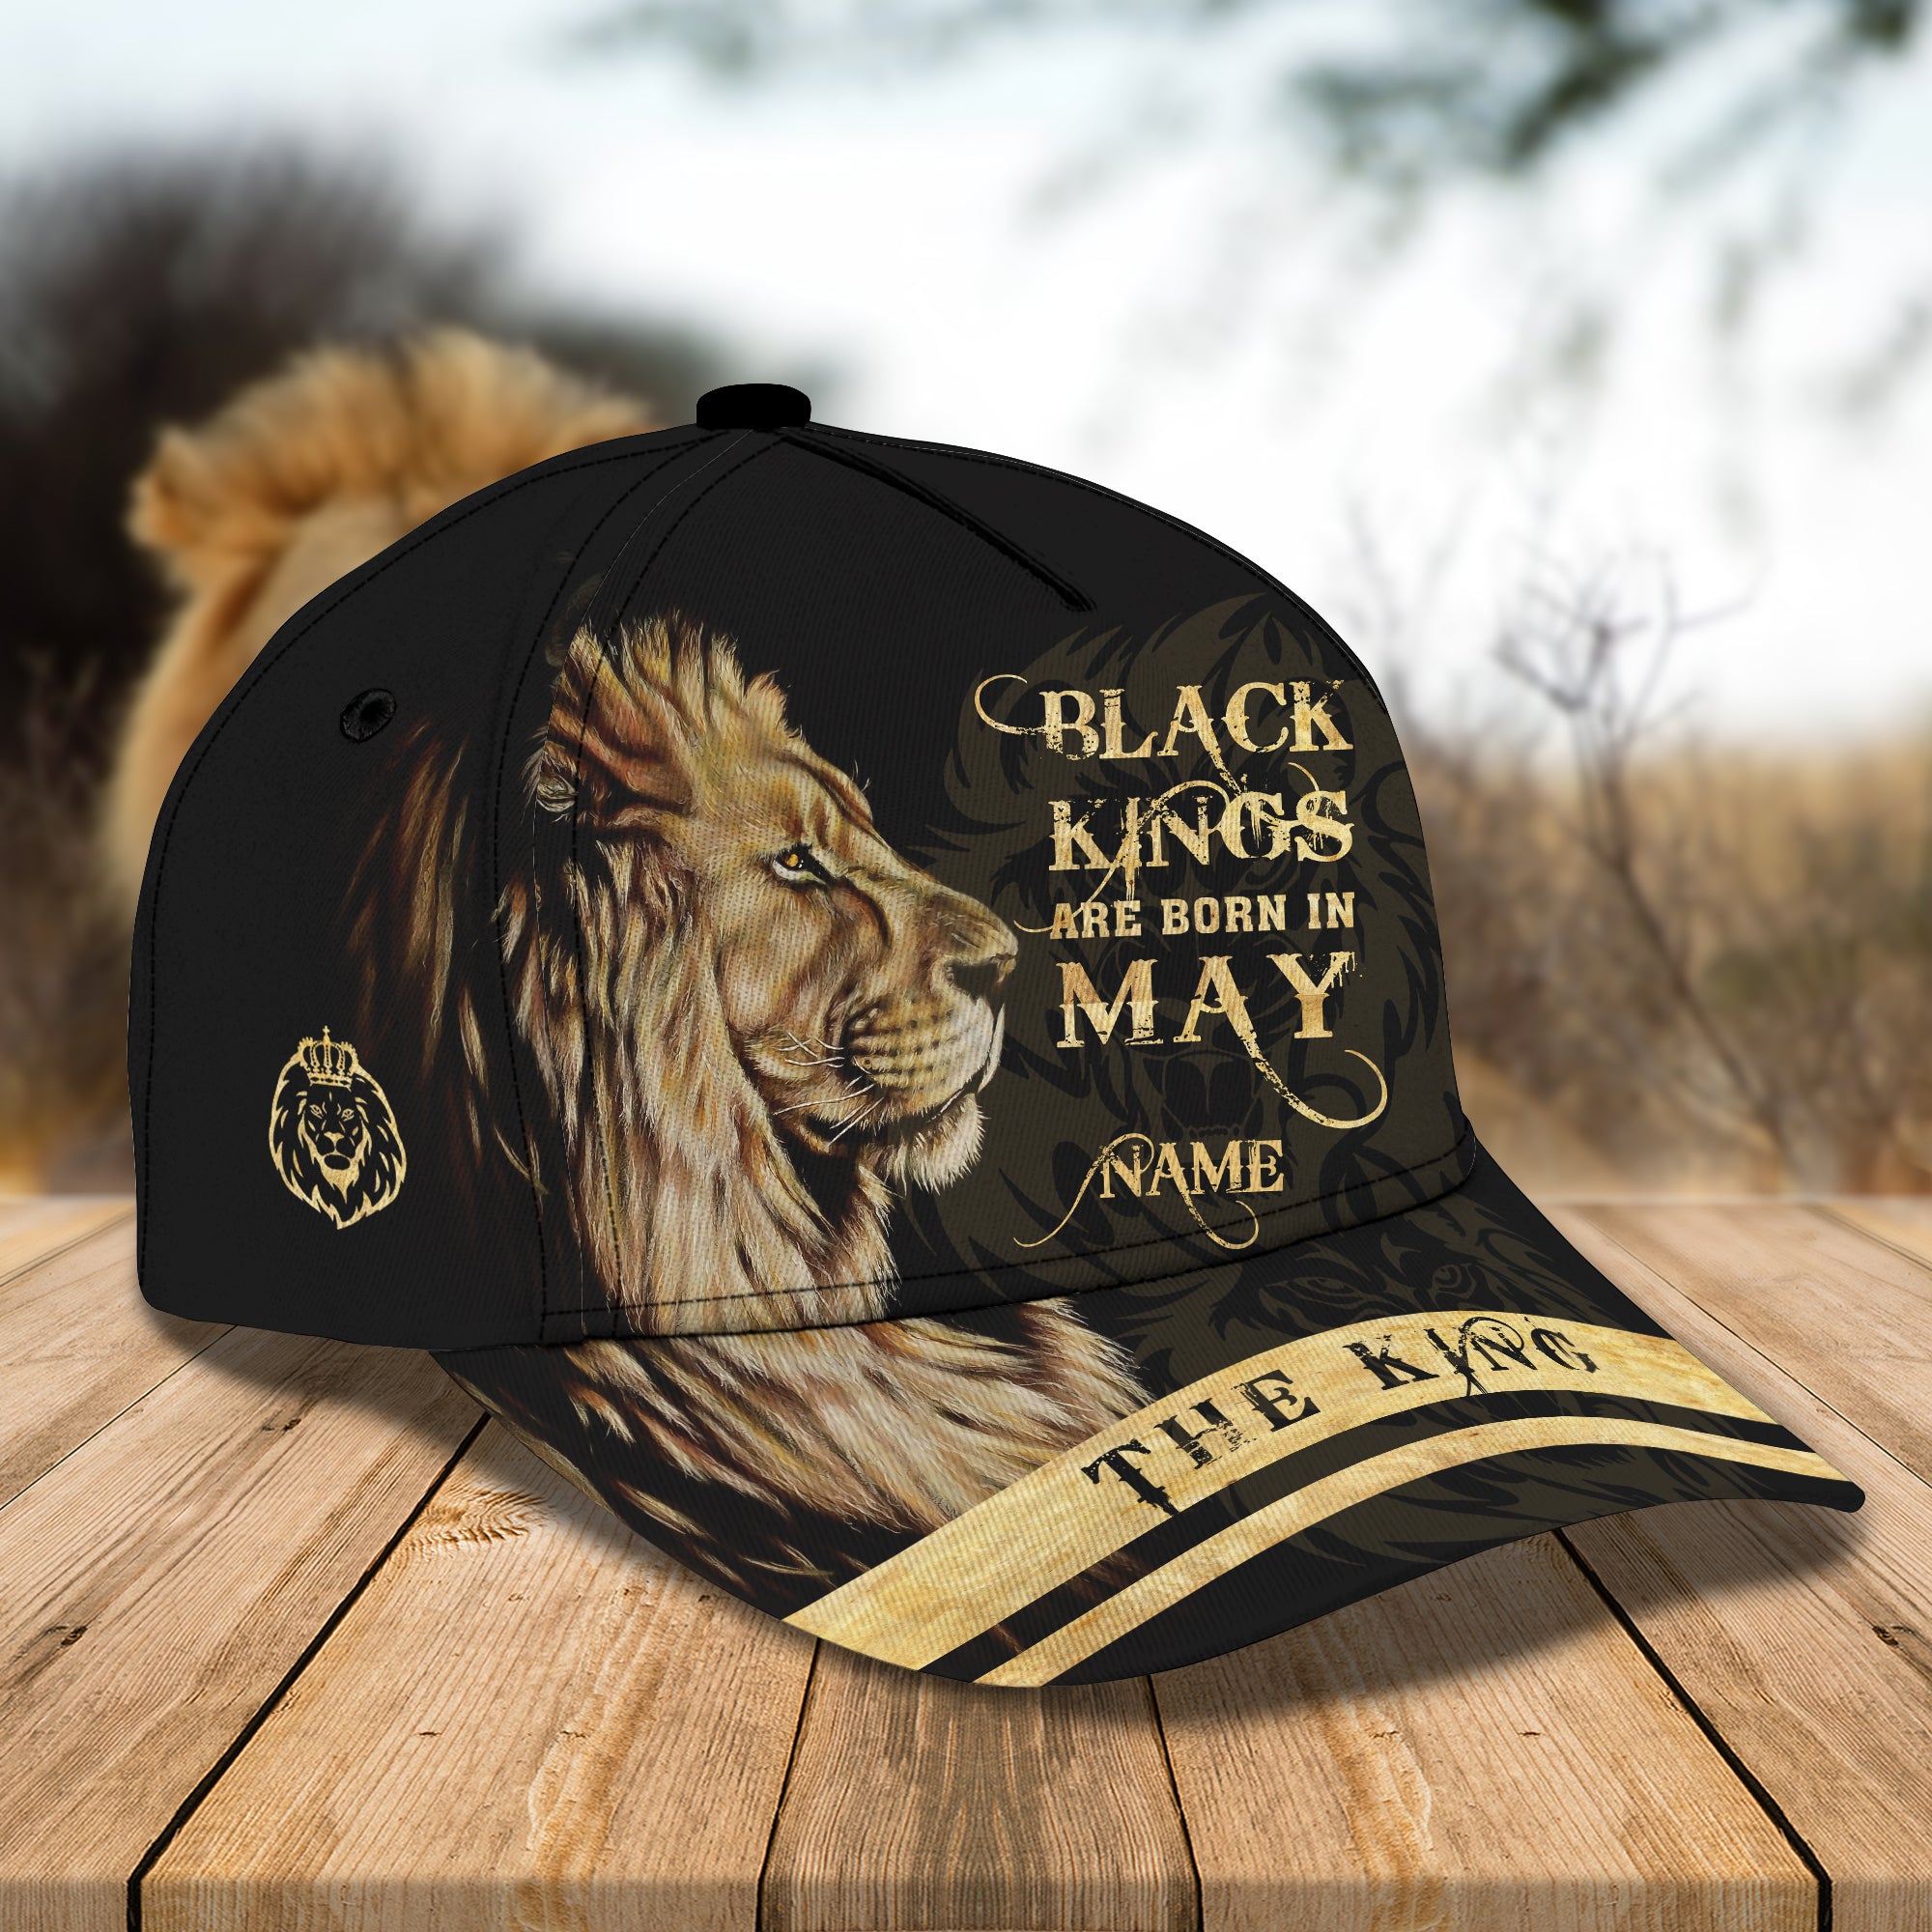 Black Kings Are Born In May - Personalized Name Cap 45 - Bhn97